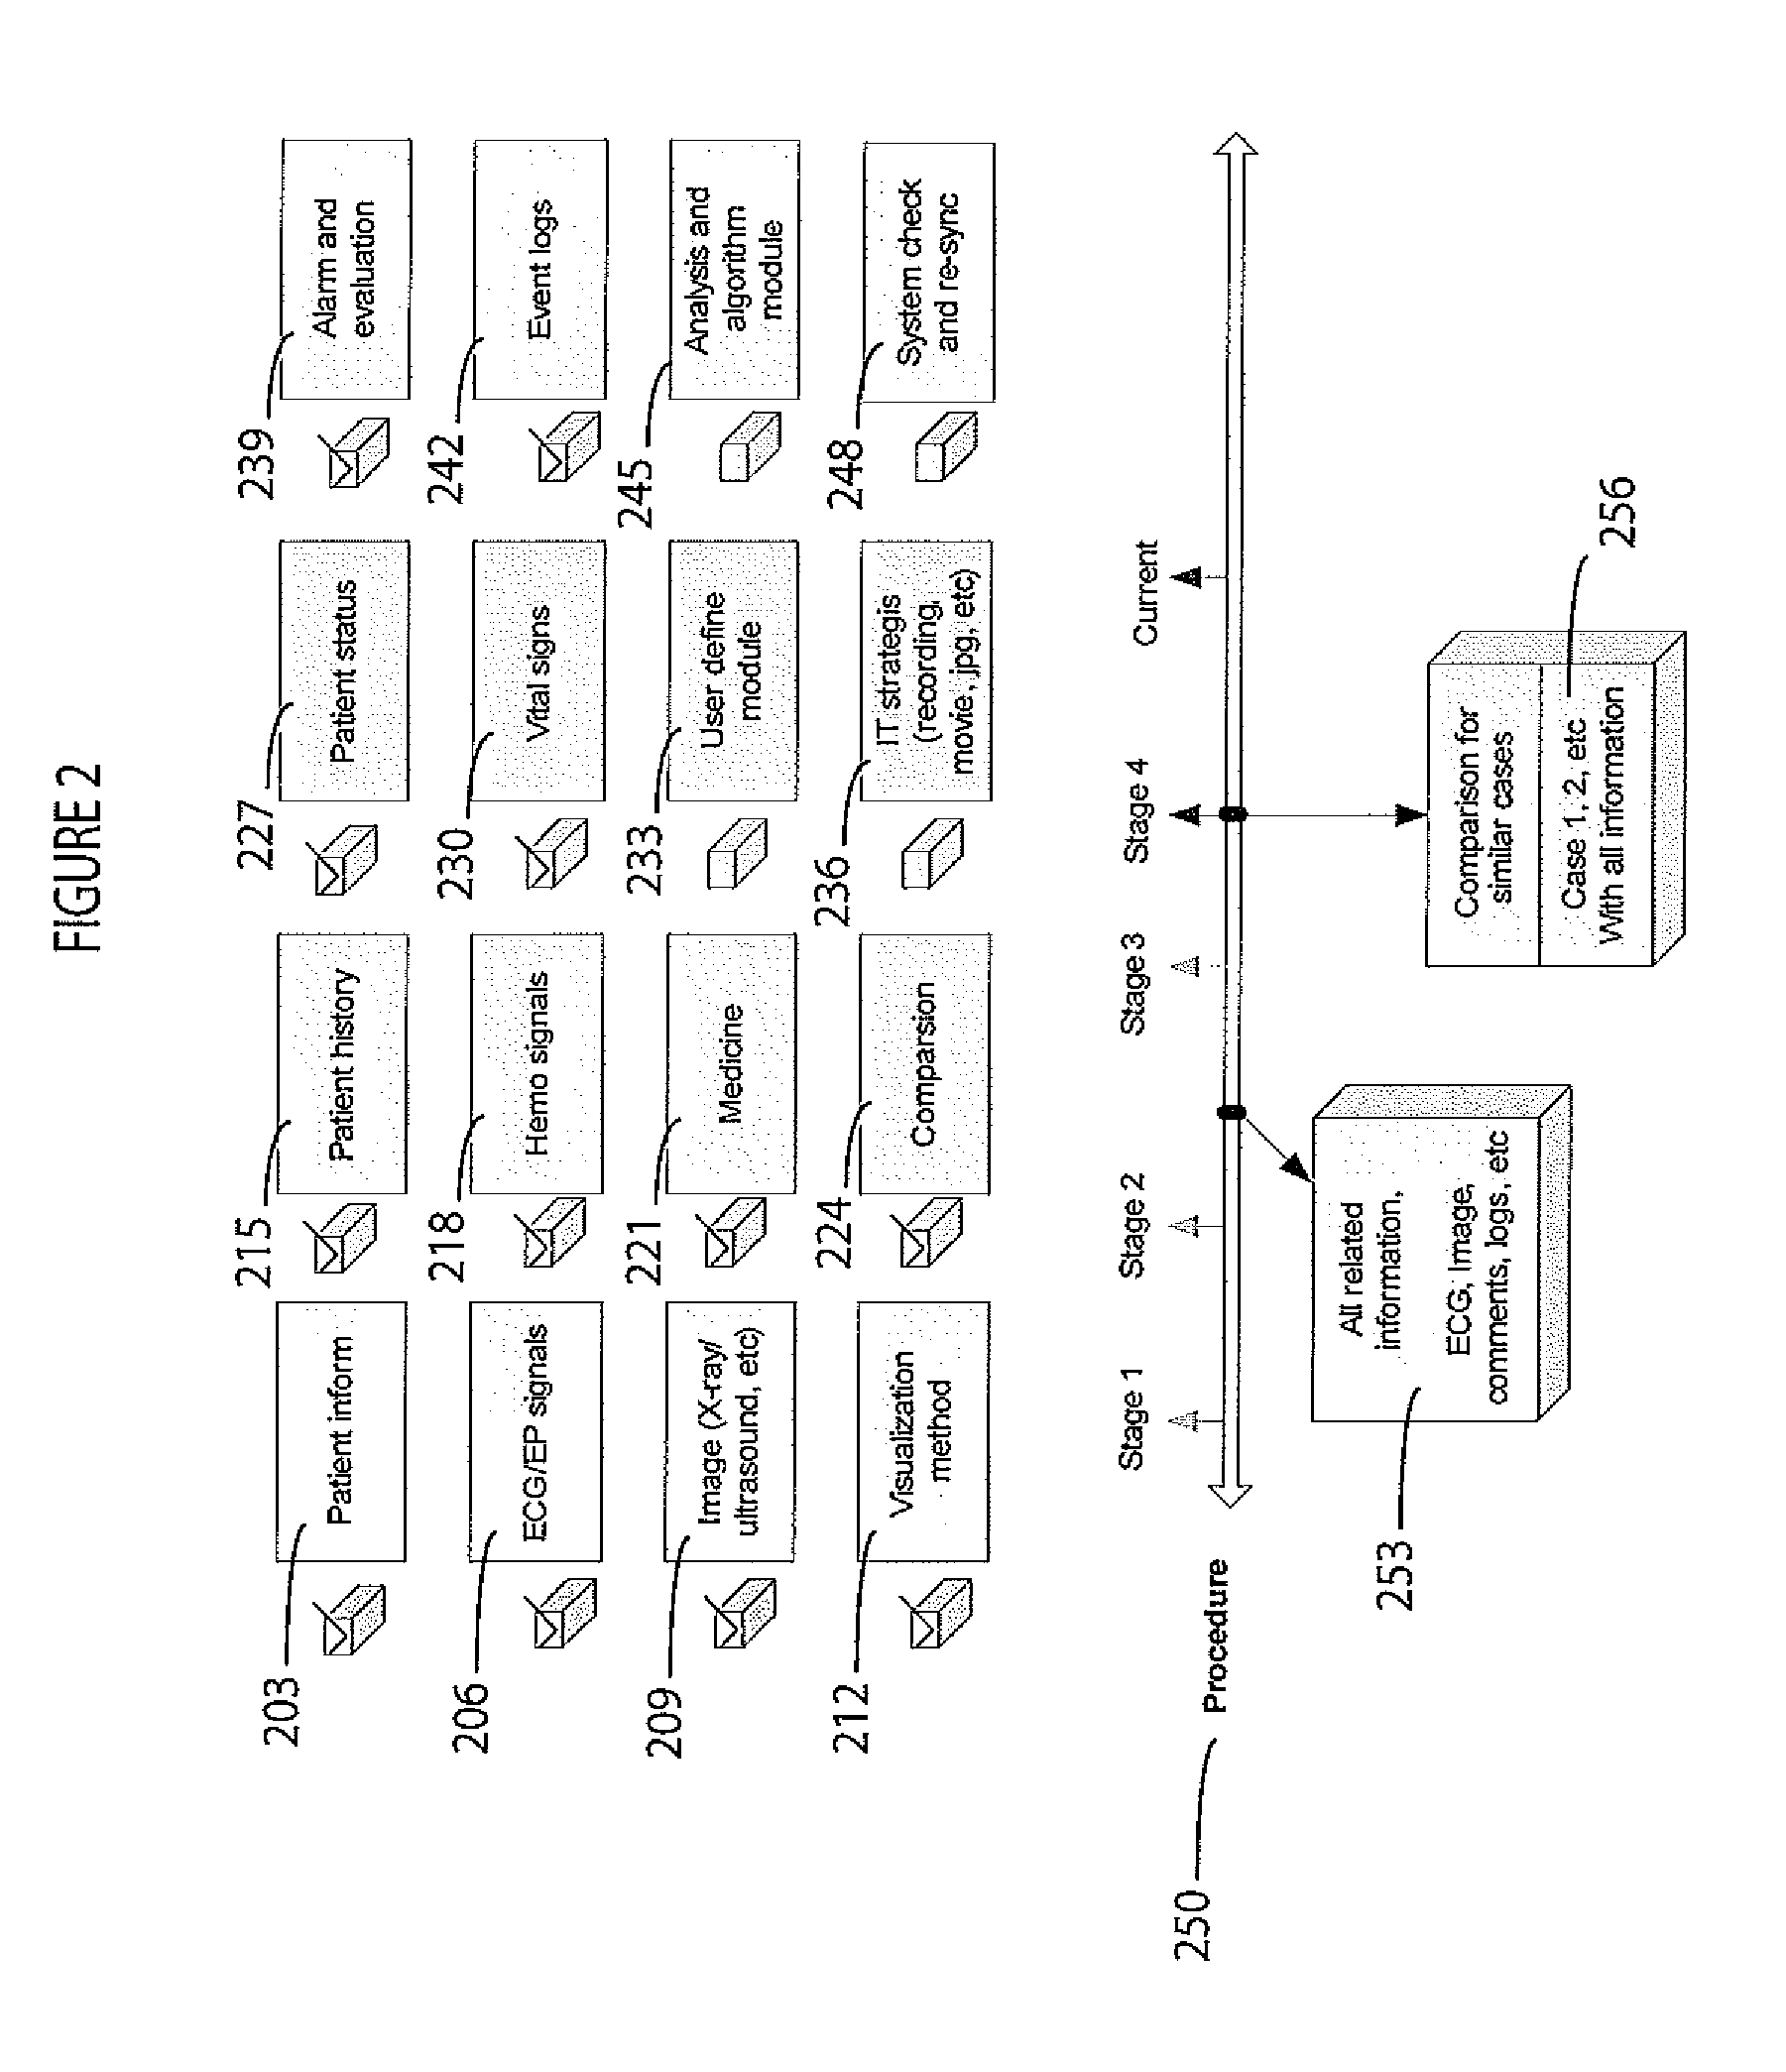 System for Monitoring and Visualizing a Patient Treatment Process